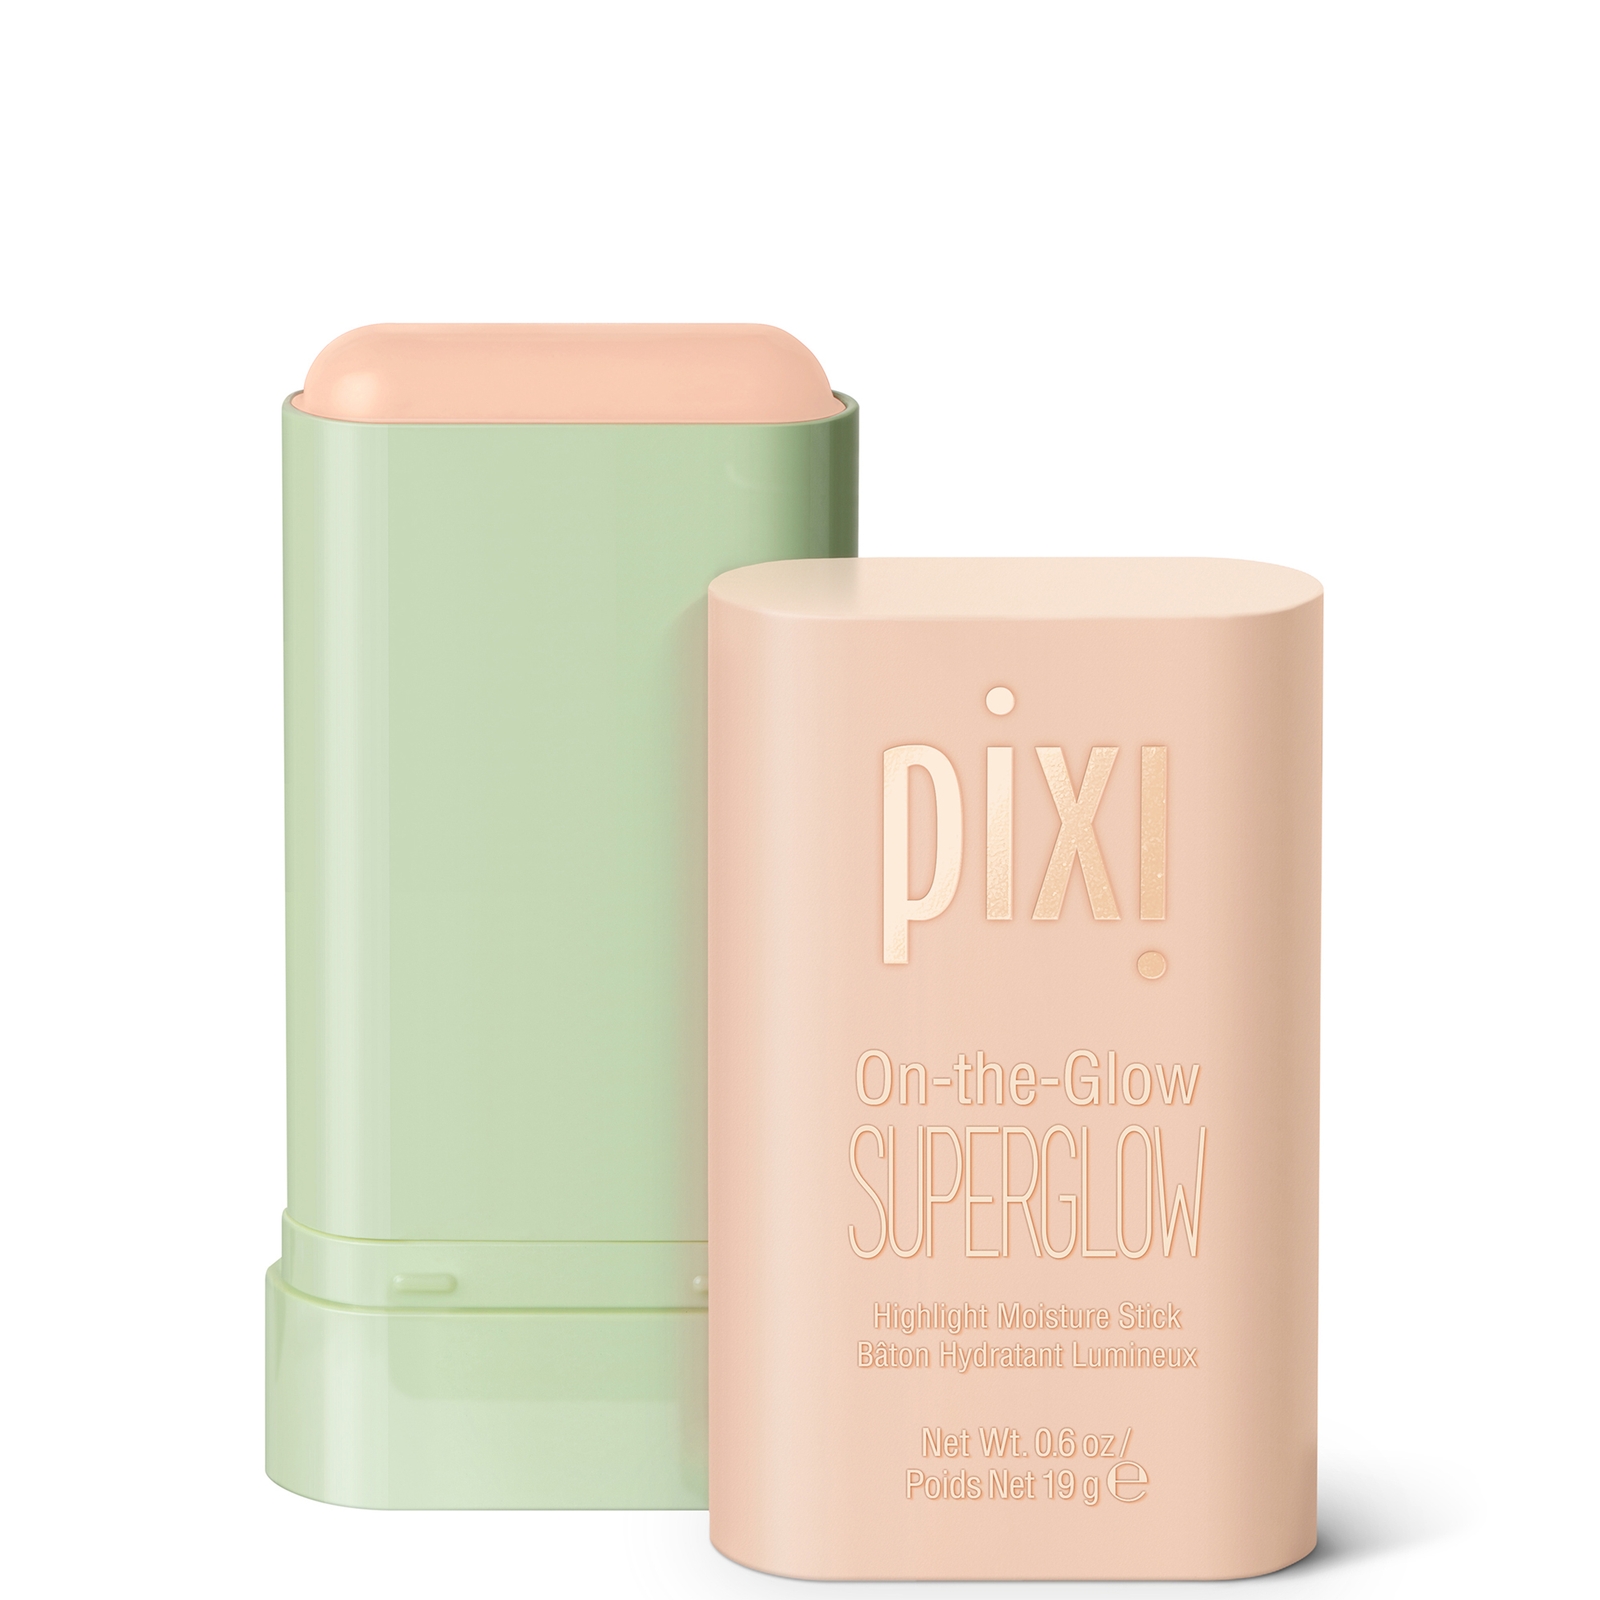 Pixi On-the-glow Superglow Highlighter 19g (various Shades) - Naturalustre In White